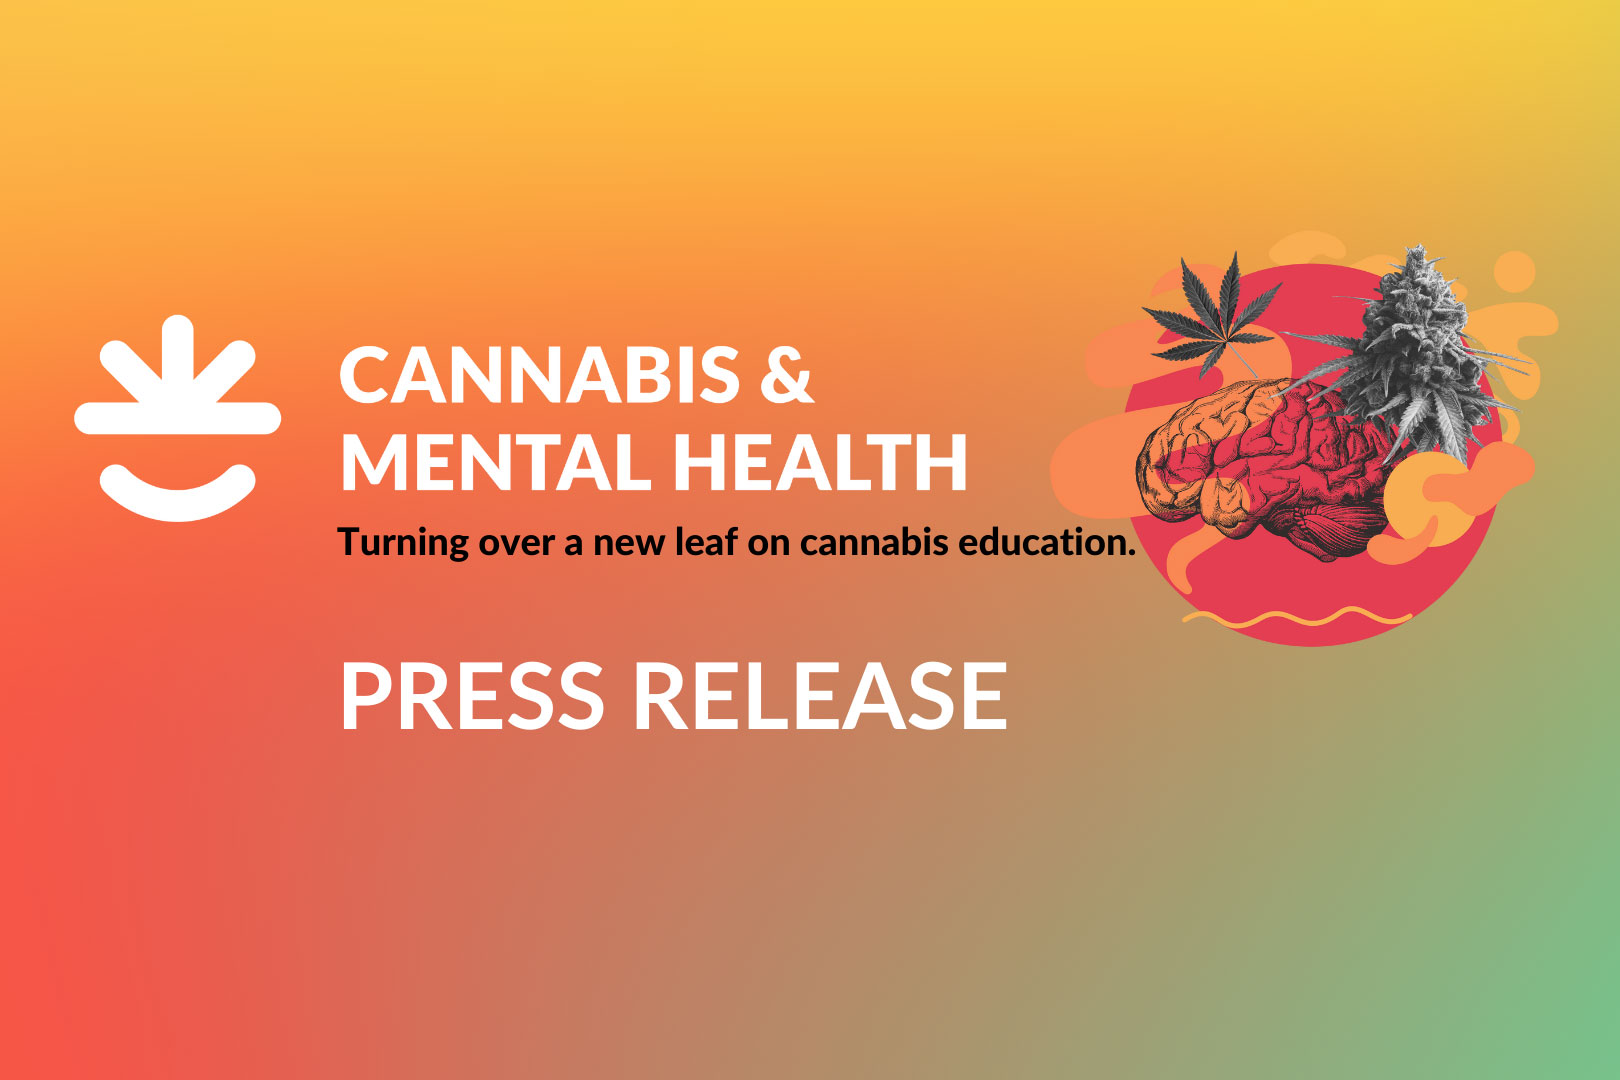 Press release - Cannabis and Mental Health